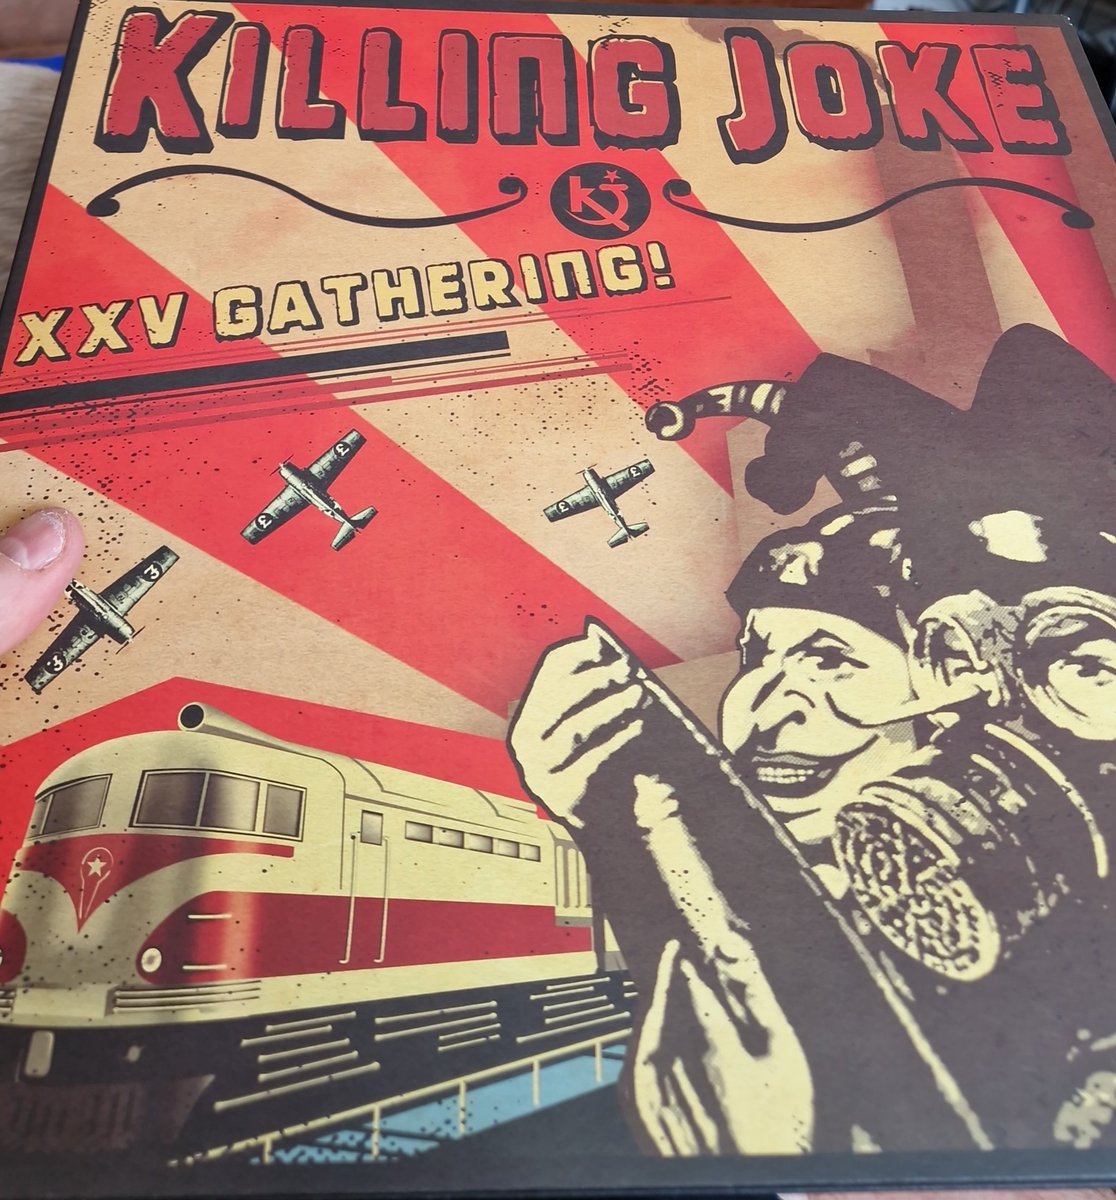 Pleased with the Father's Day present
#killingjoke
#gatherers